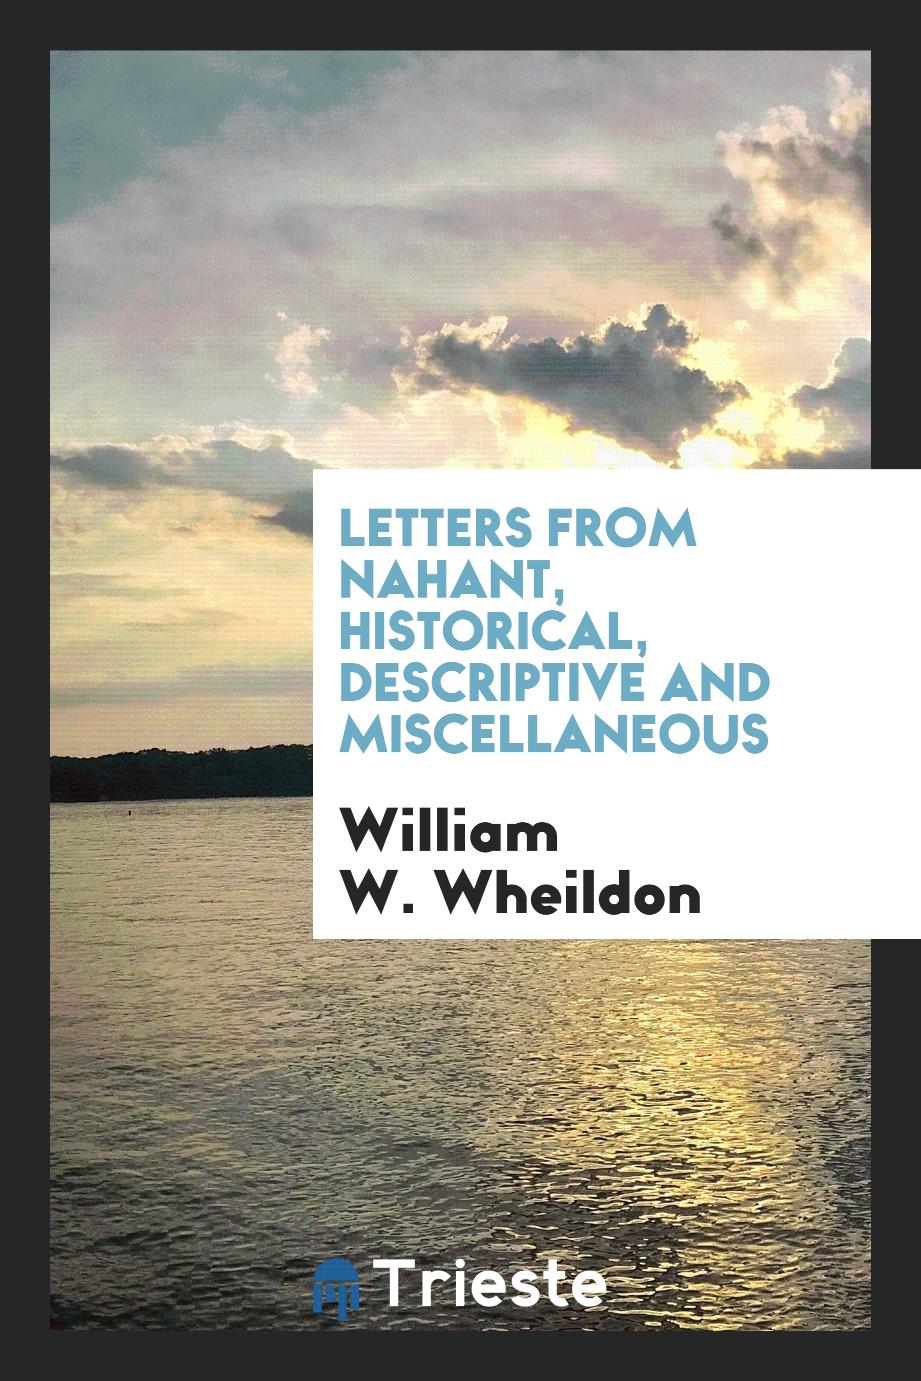 Letters from Nahant, historical, descriptive and miscellaneous